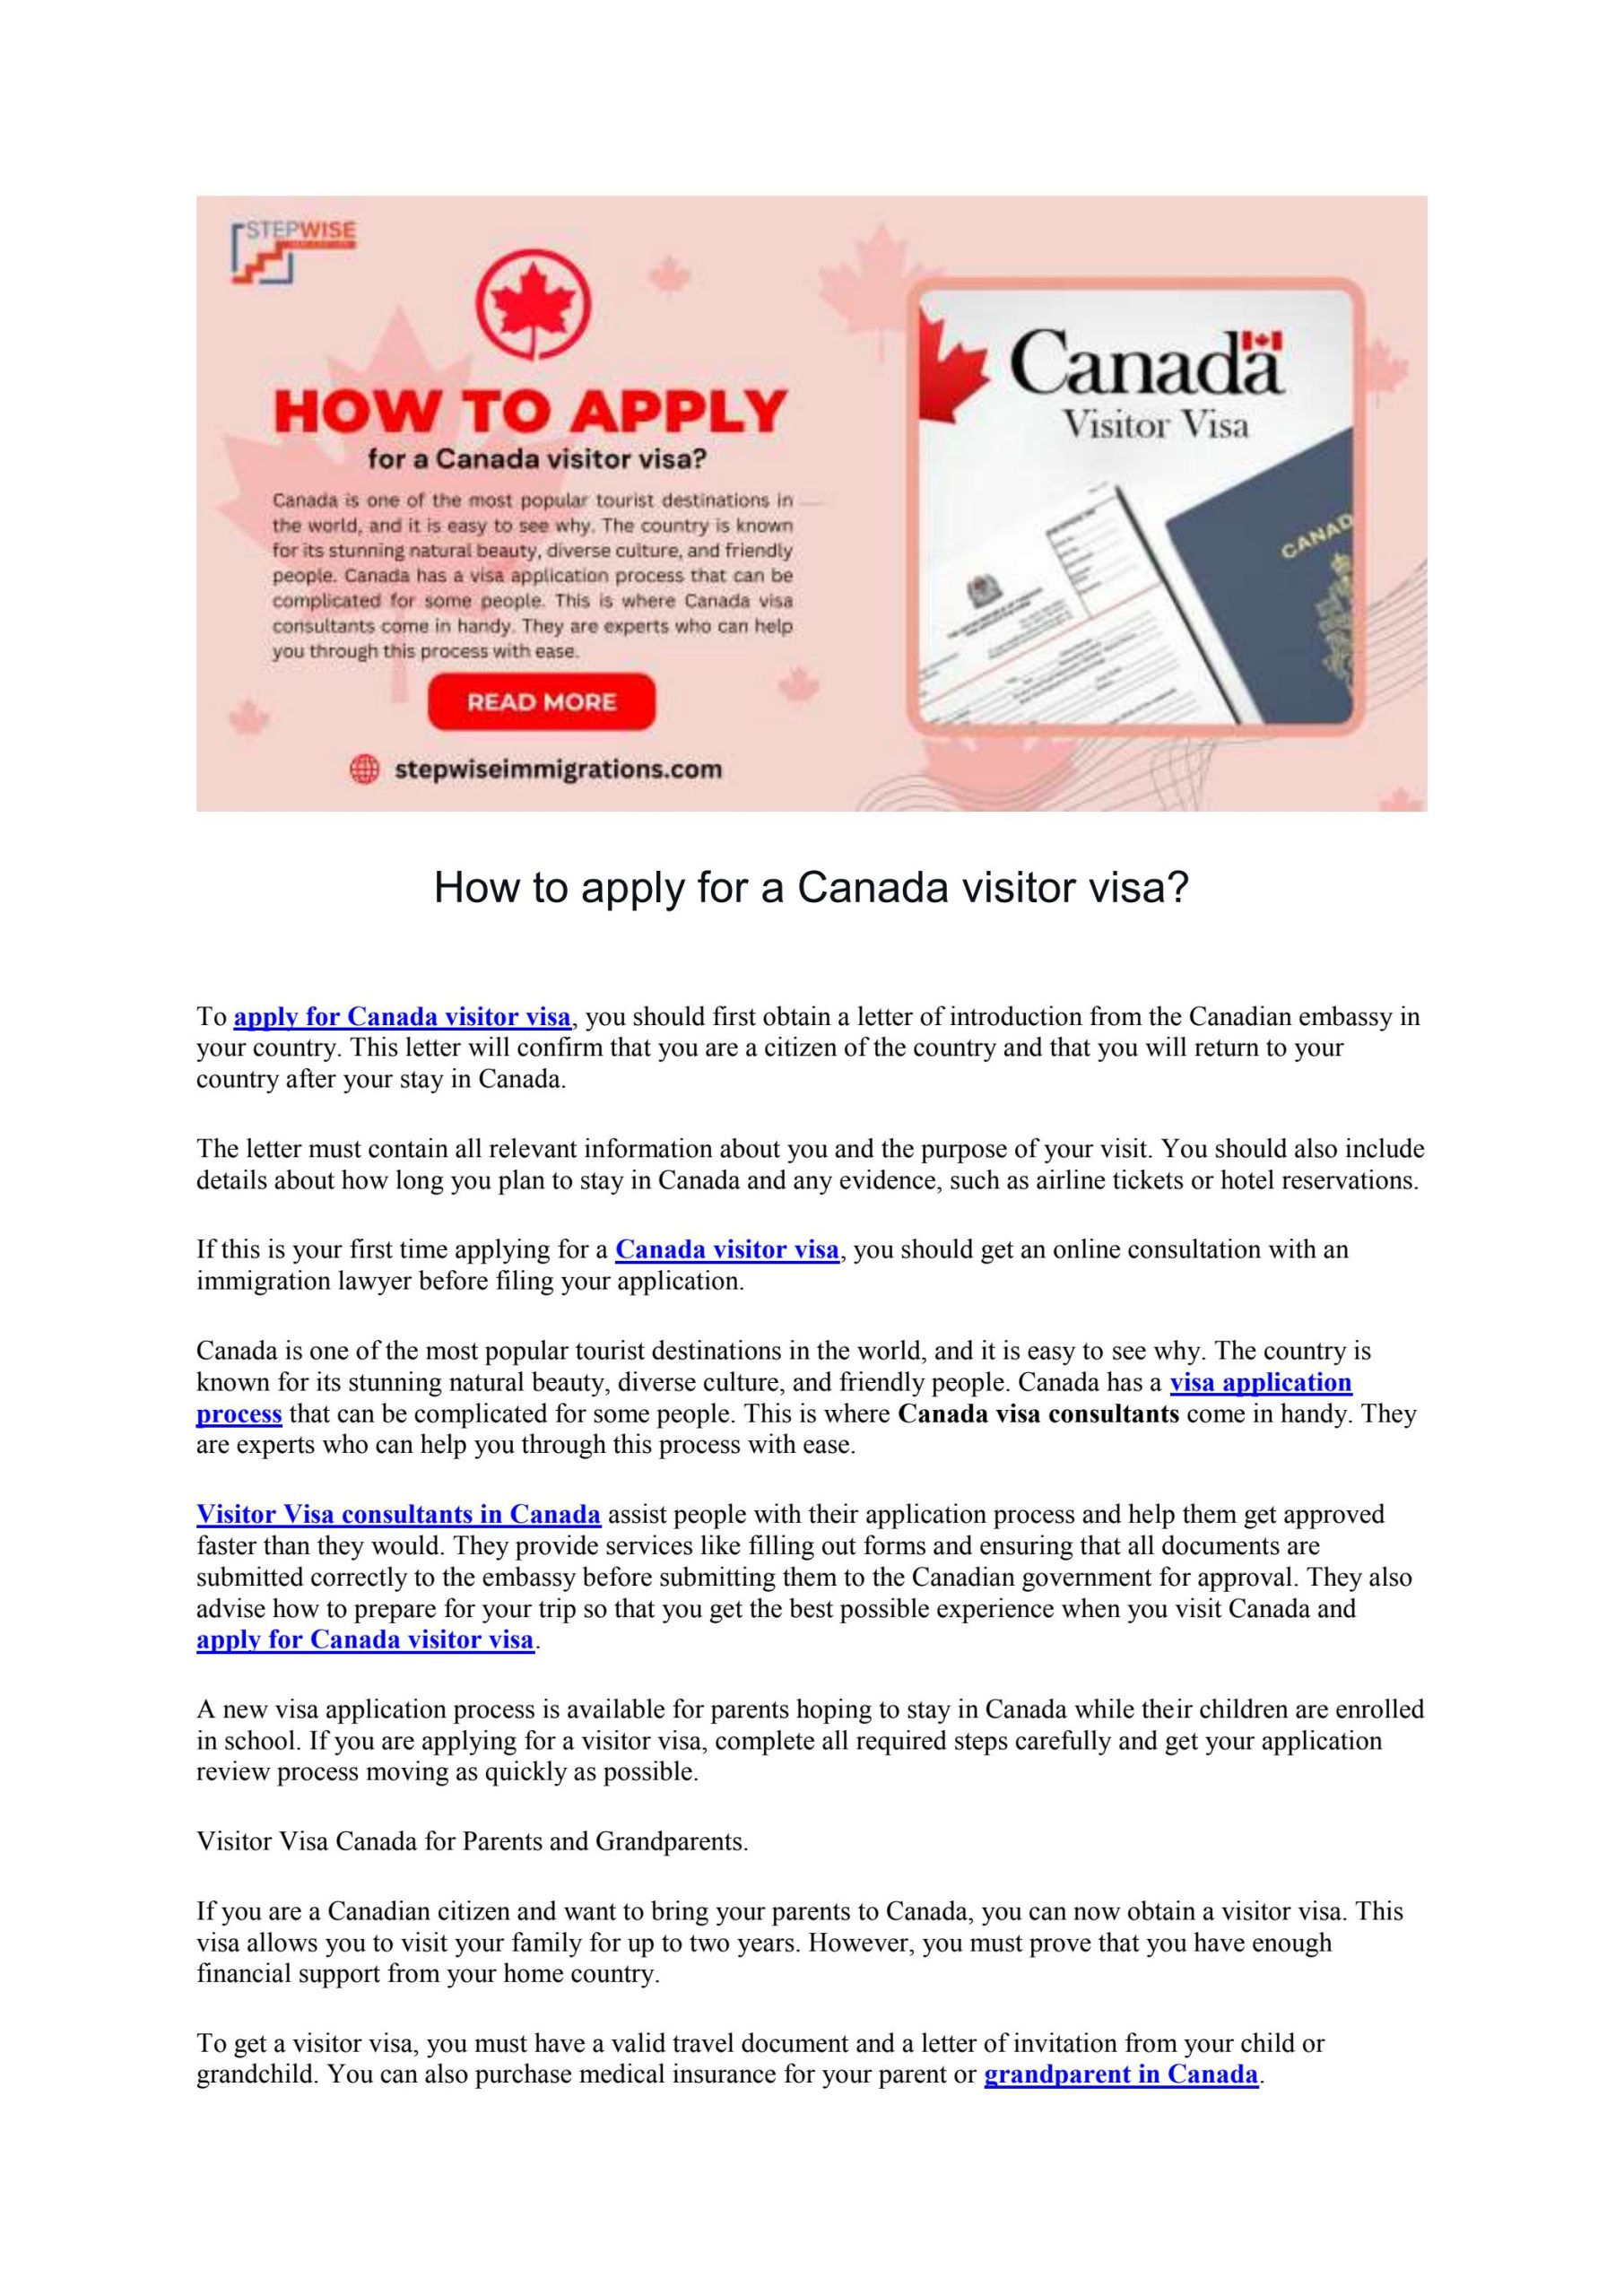 Can I Apply For Canada Visitor Visa Now?